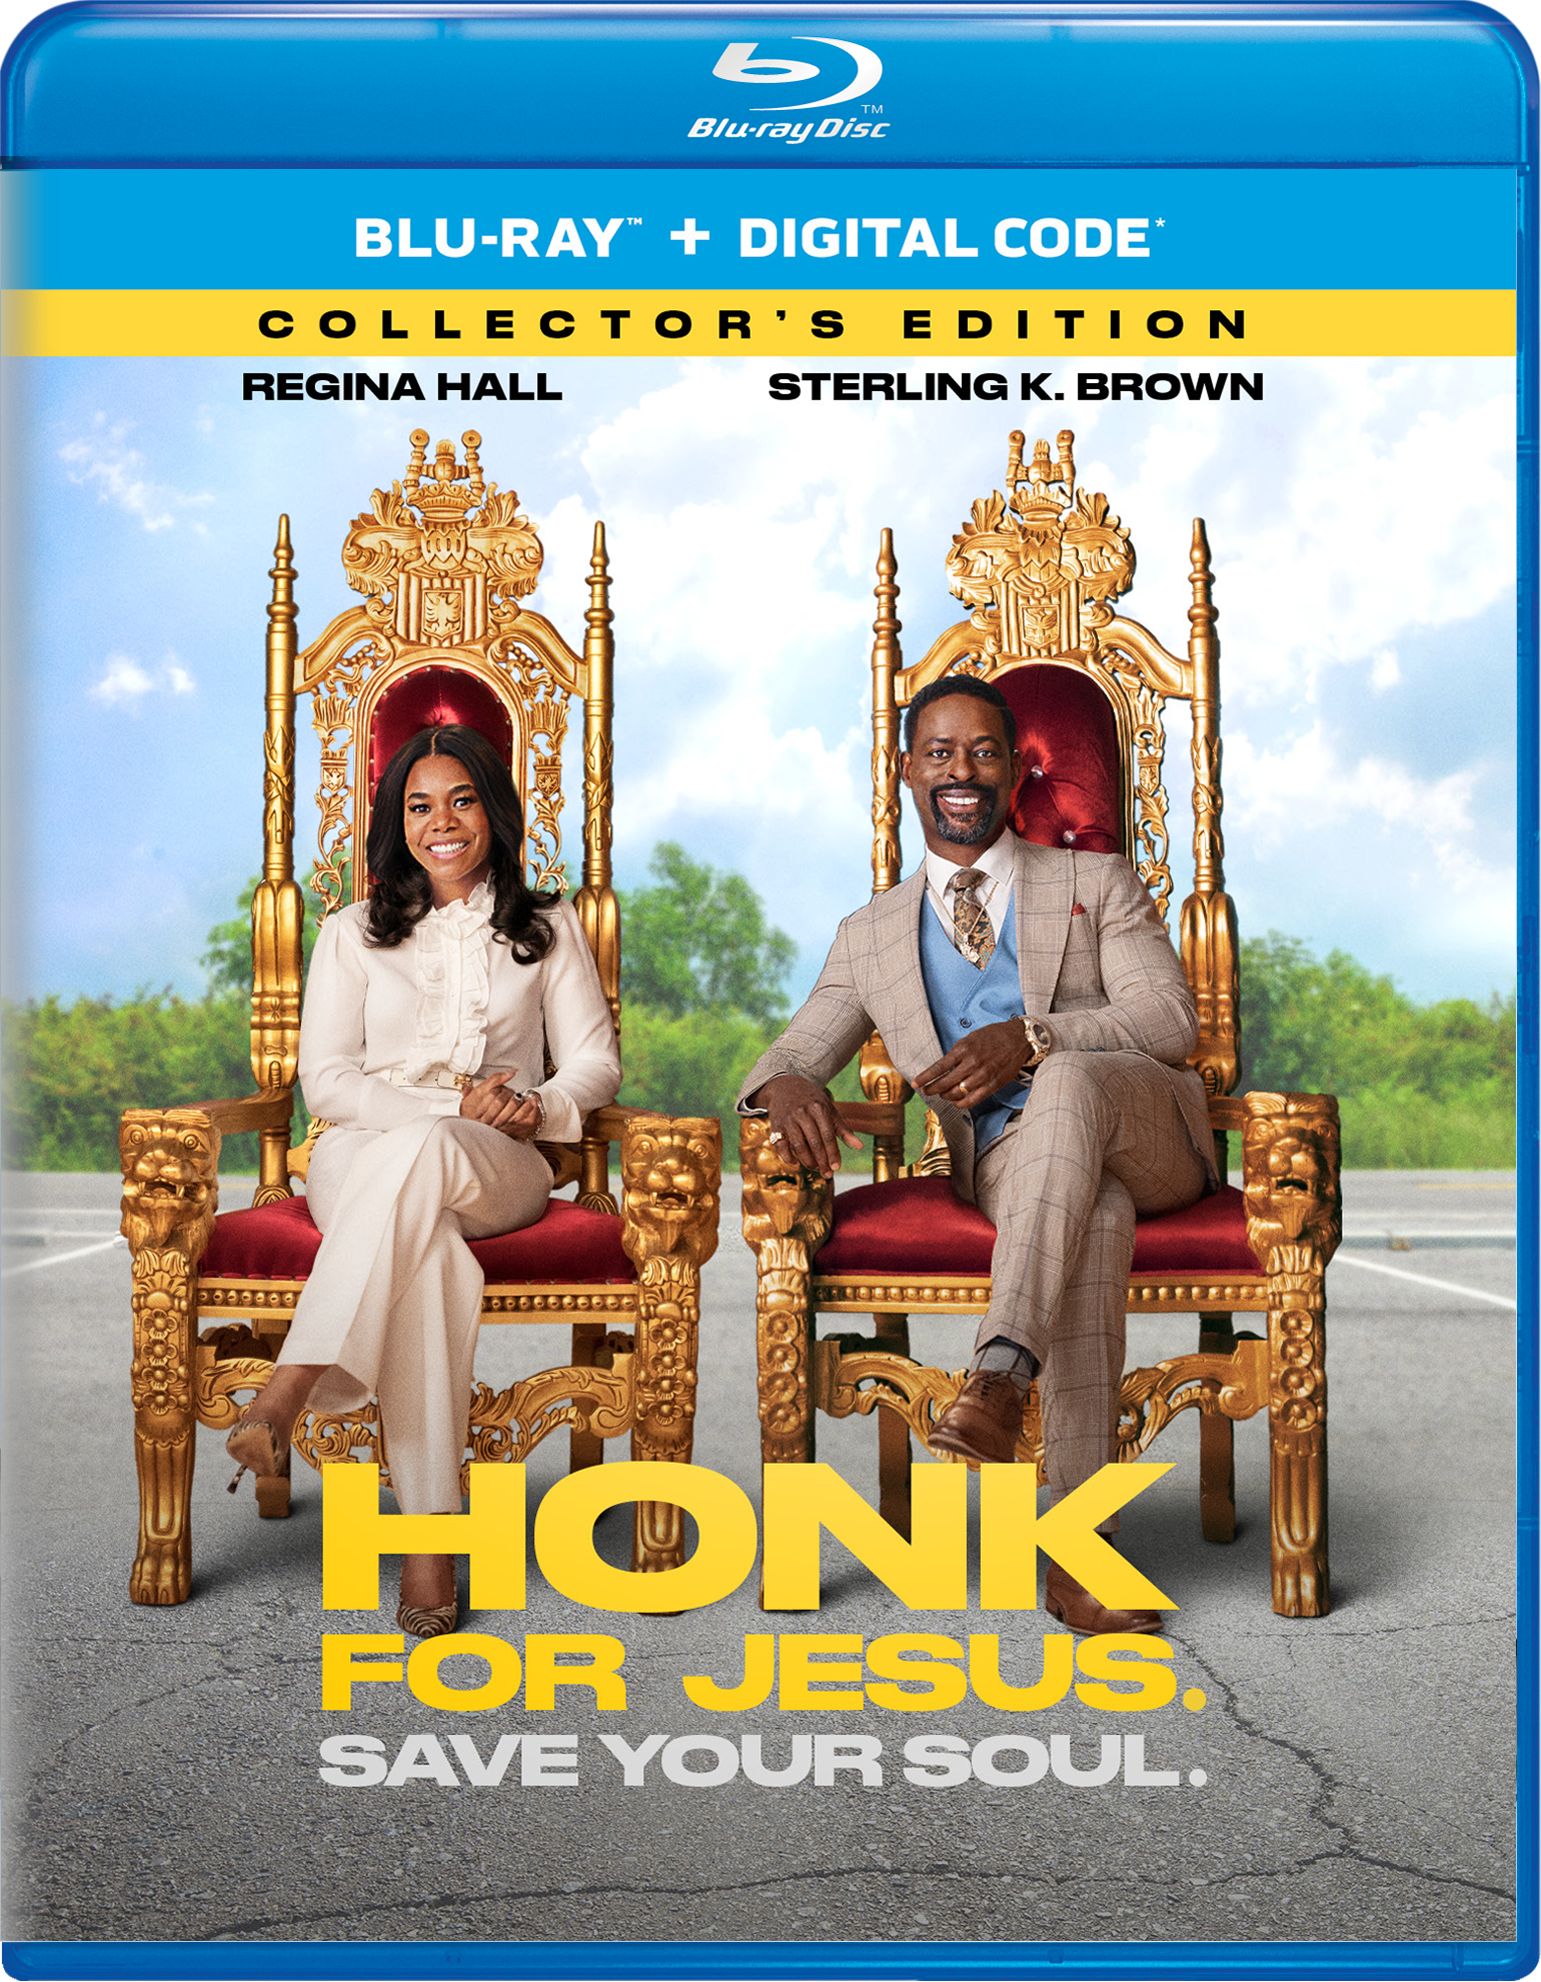 Honk For Jesus. Save Your Soul (Blu-ray + Digital Copy) - Blu-ray [ 2022 ]  - Comedy Movies On Blu-ray - Movies On GRUV